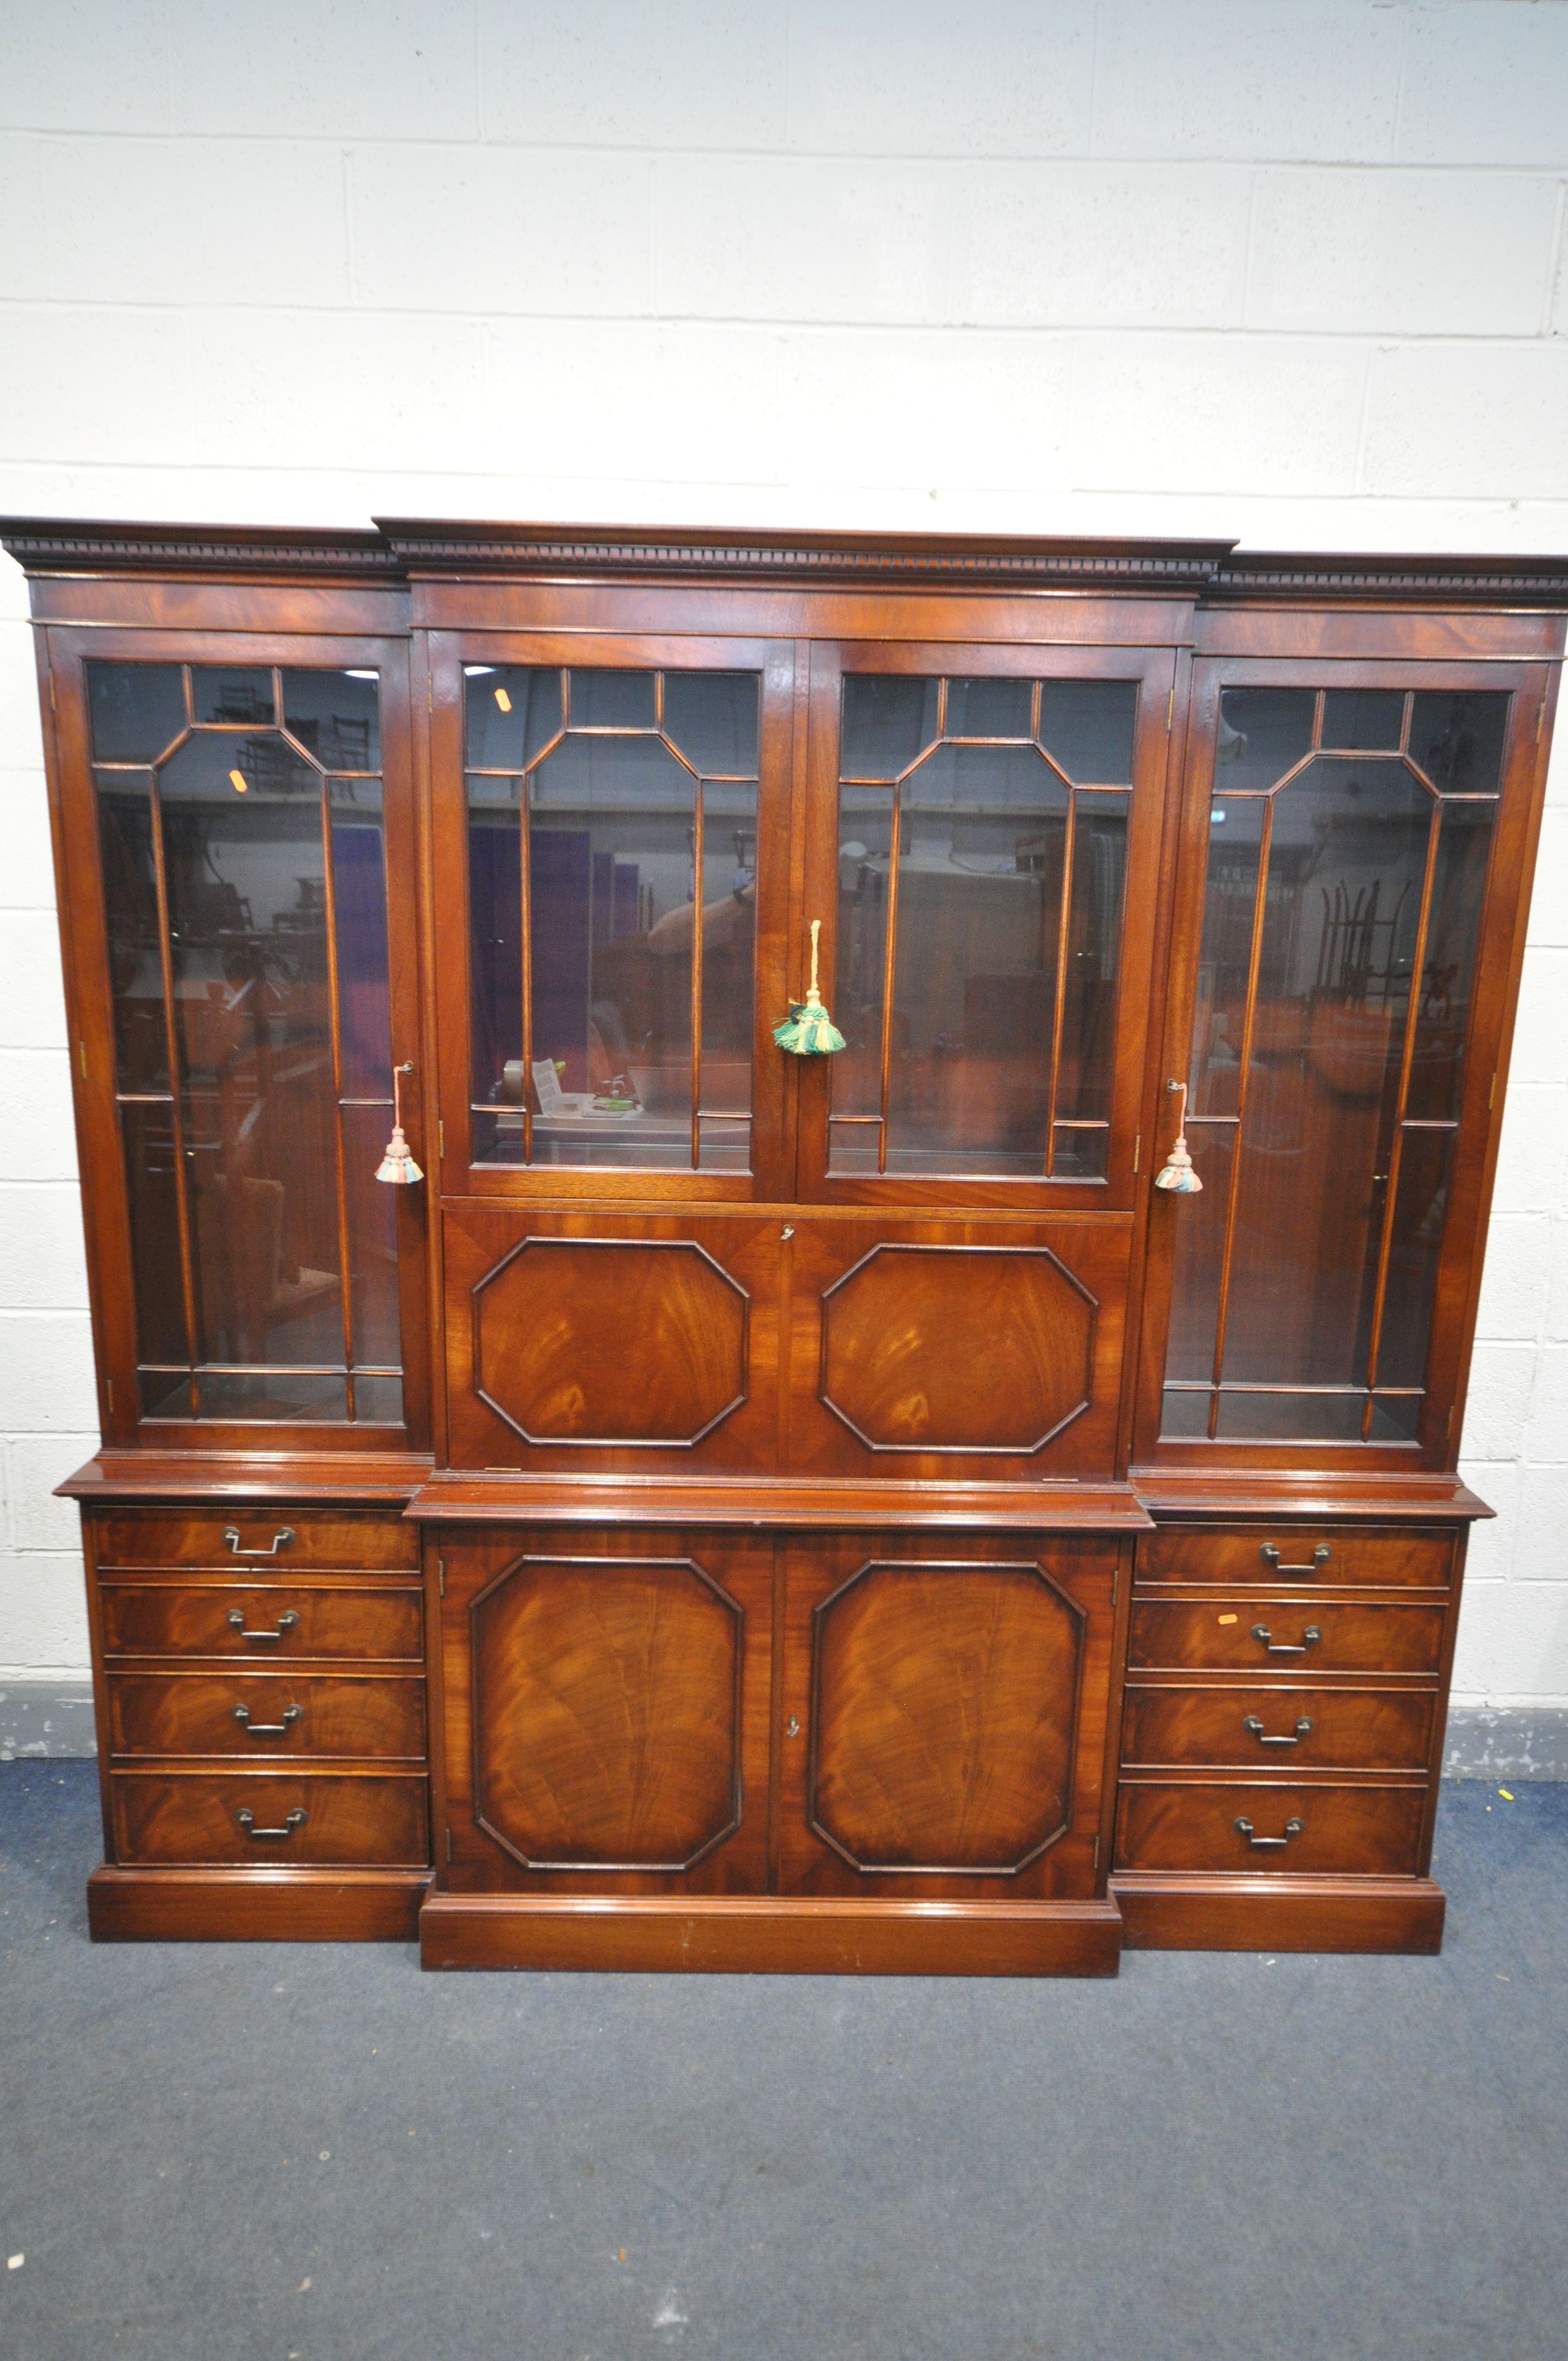 A WADE FURNITURE LTD MAHOGANY BREAKFRONT BOOKCASE, with a central cocktail section, width 207cm x